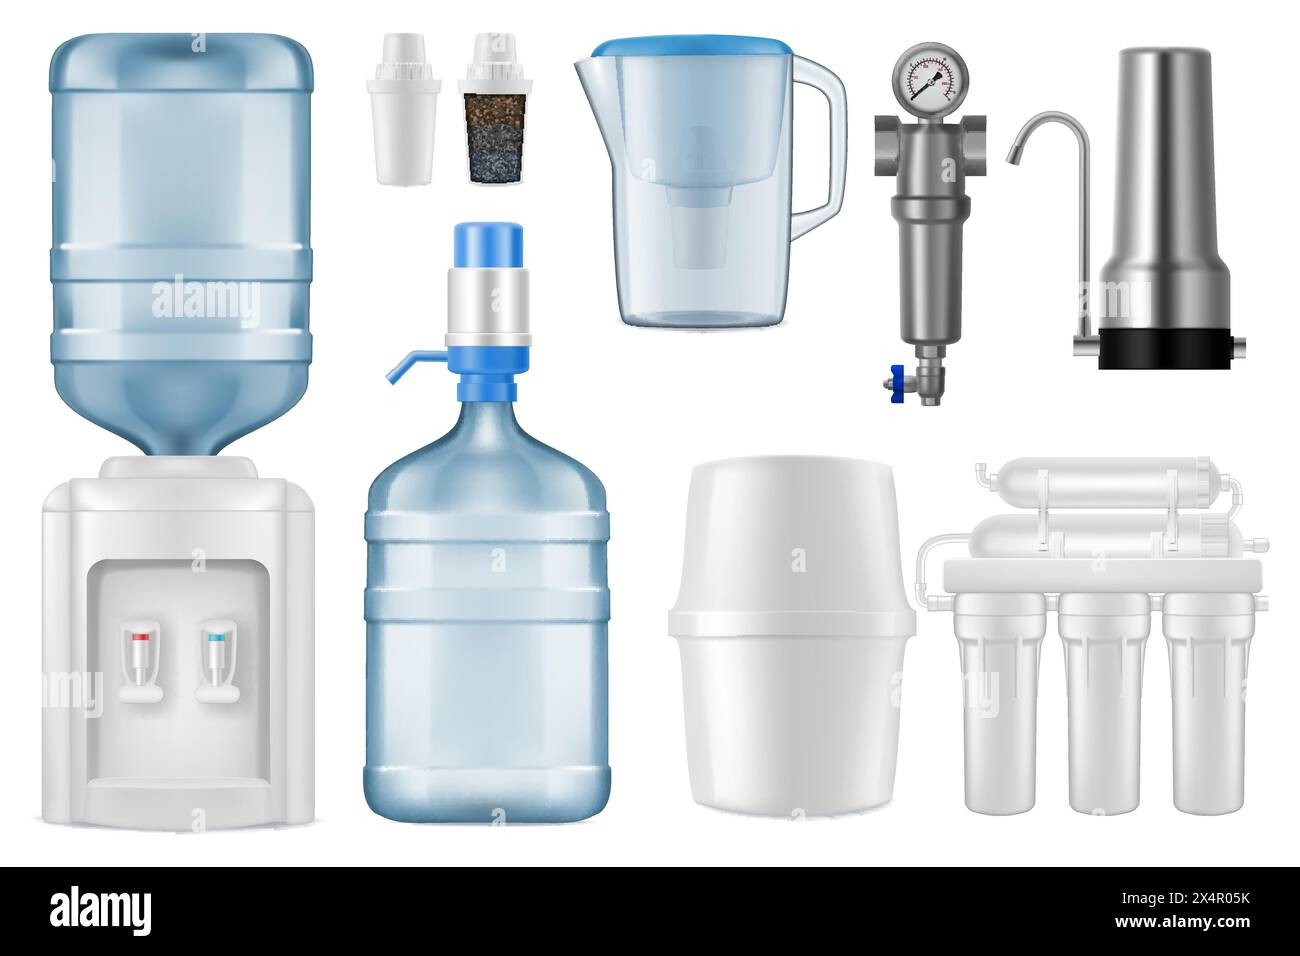 Water filter realistic vector mockups. 3d filtration jug and purification system of reverse osmosis with storage tank, filter tap and cartridges, cool Stock Vector